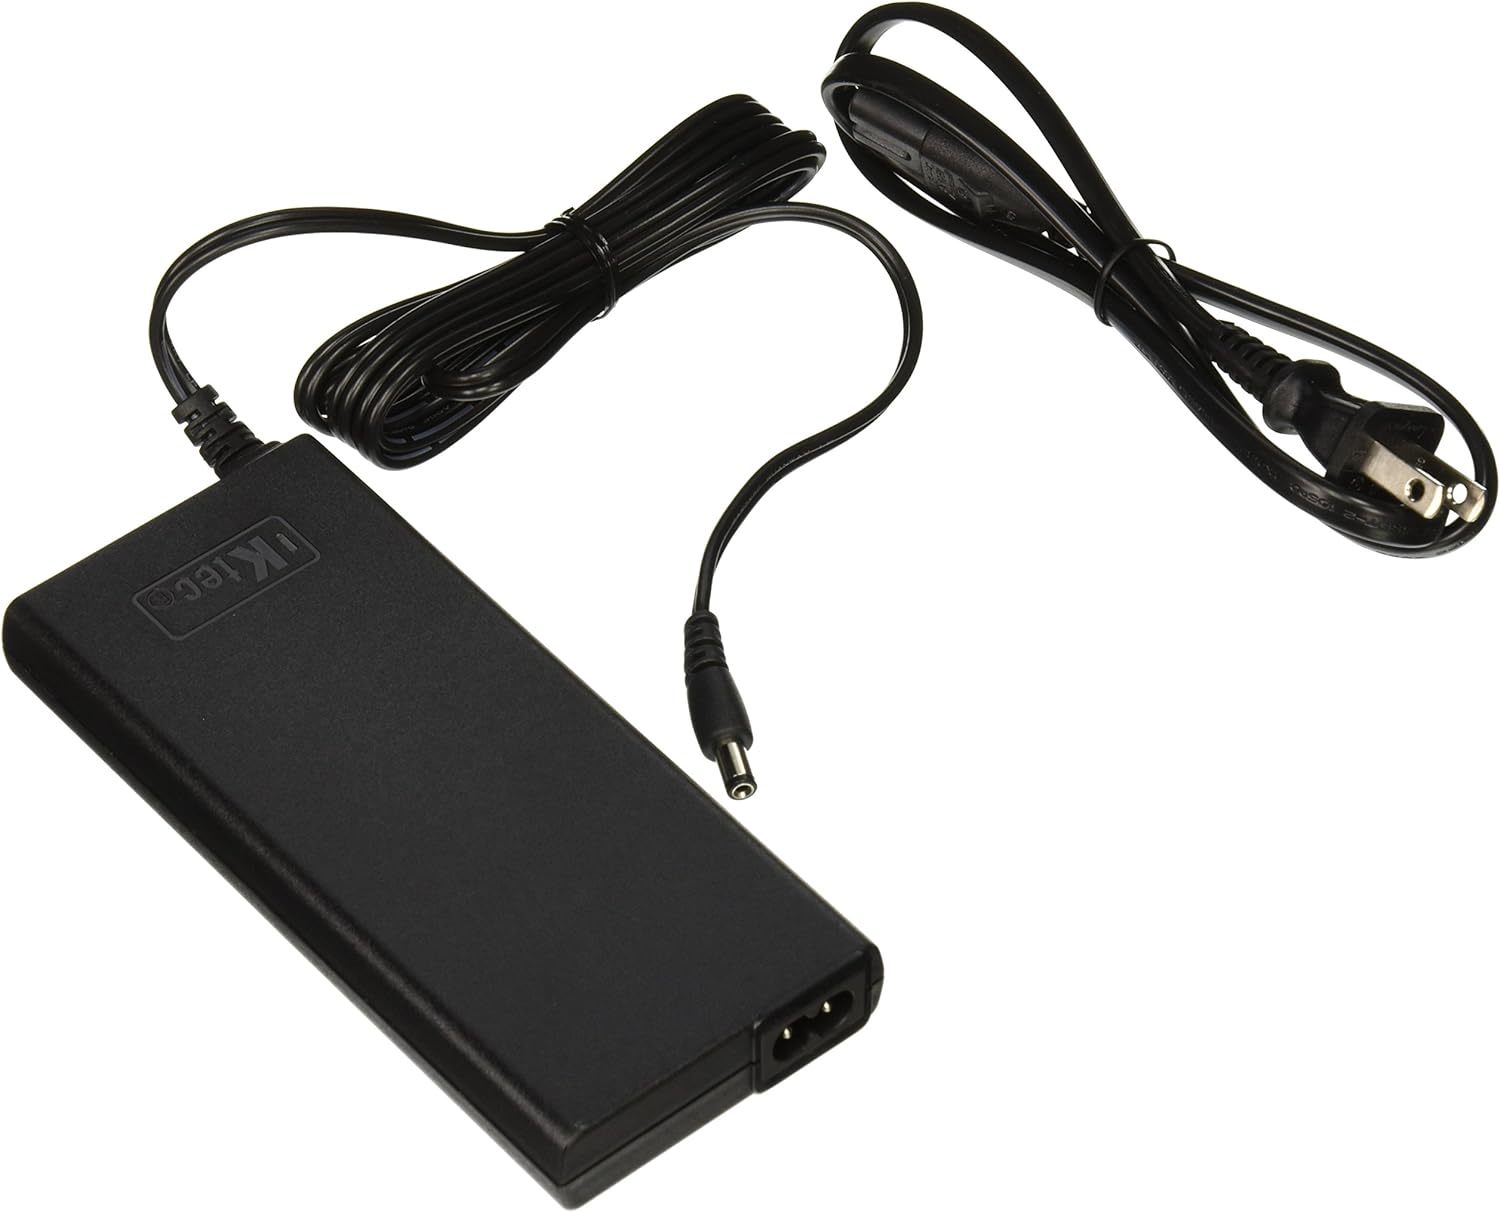 Primary image for Dymo Xtl 500 Label Maker Ac Adapter (1888635).